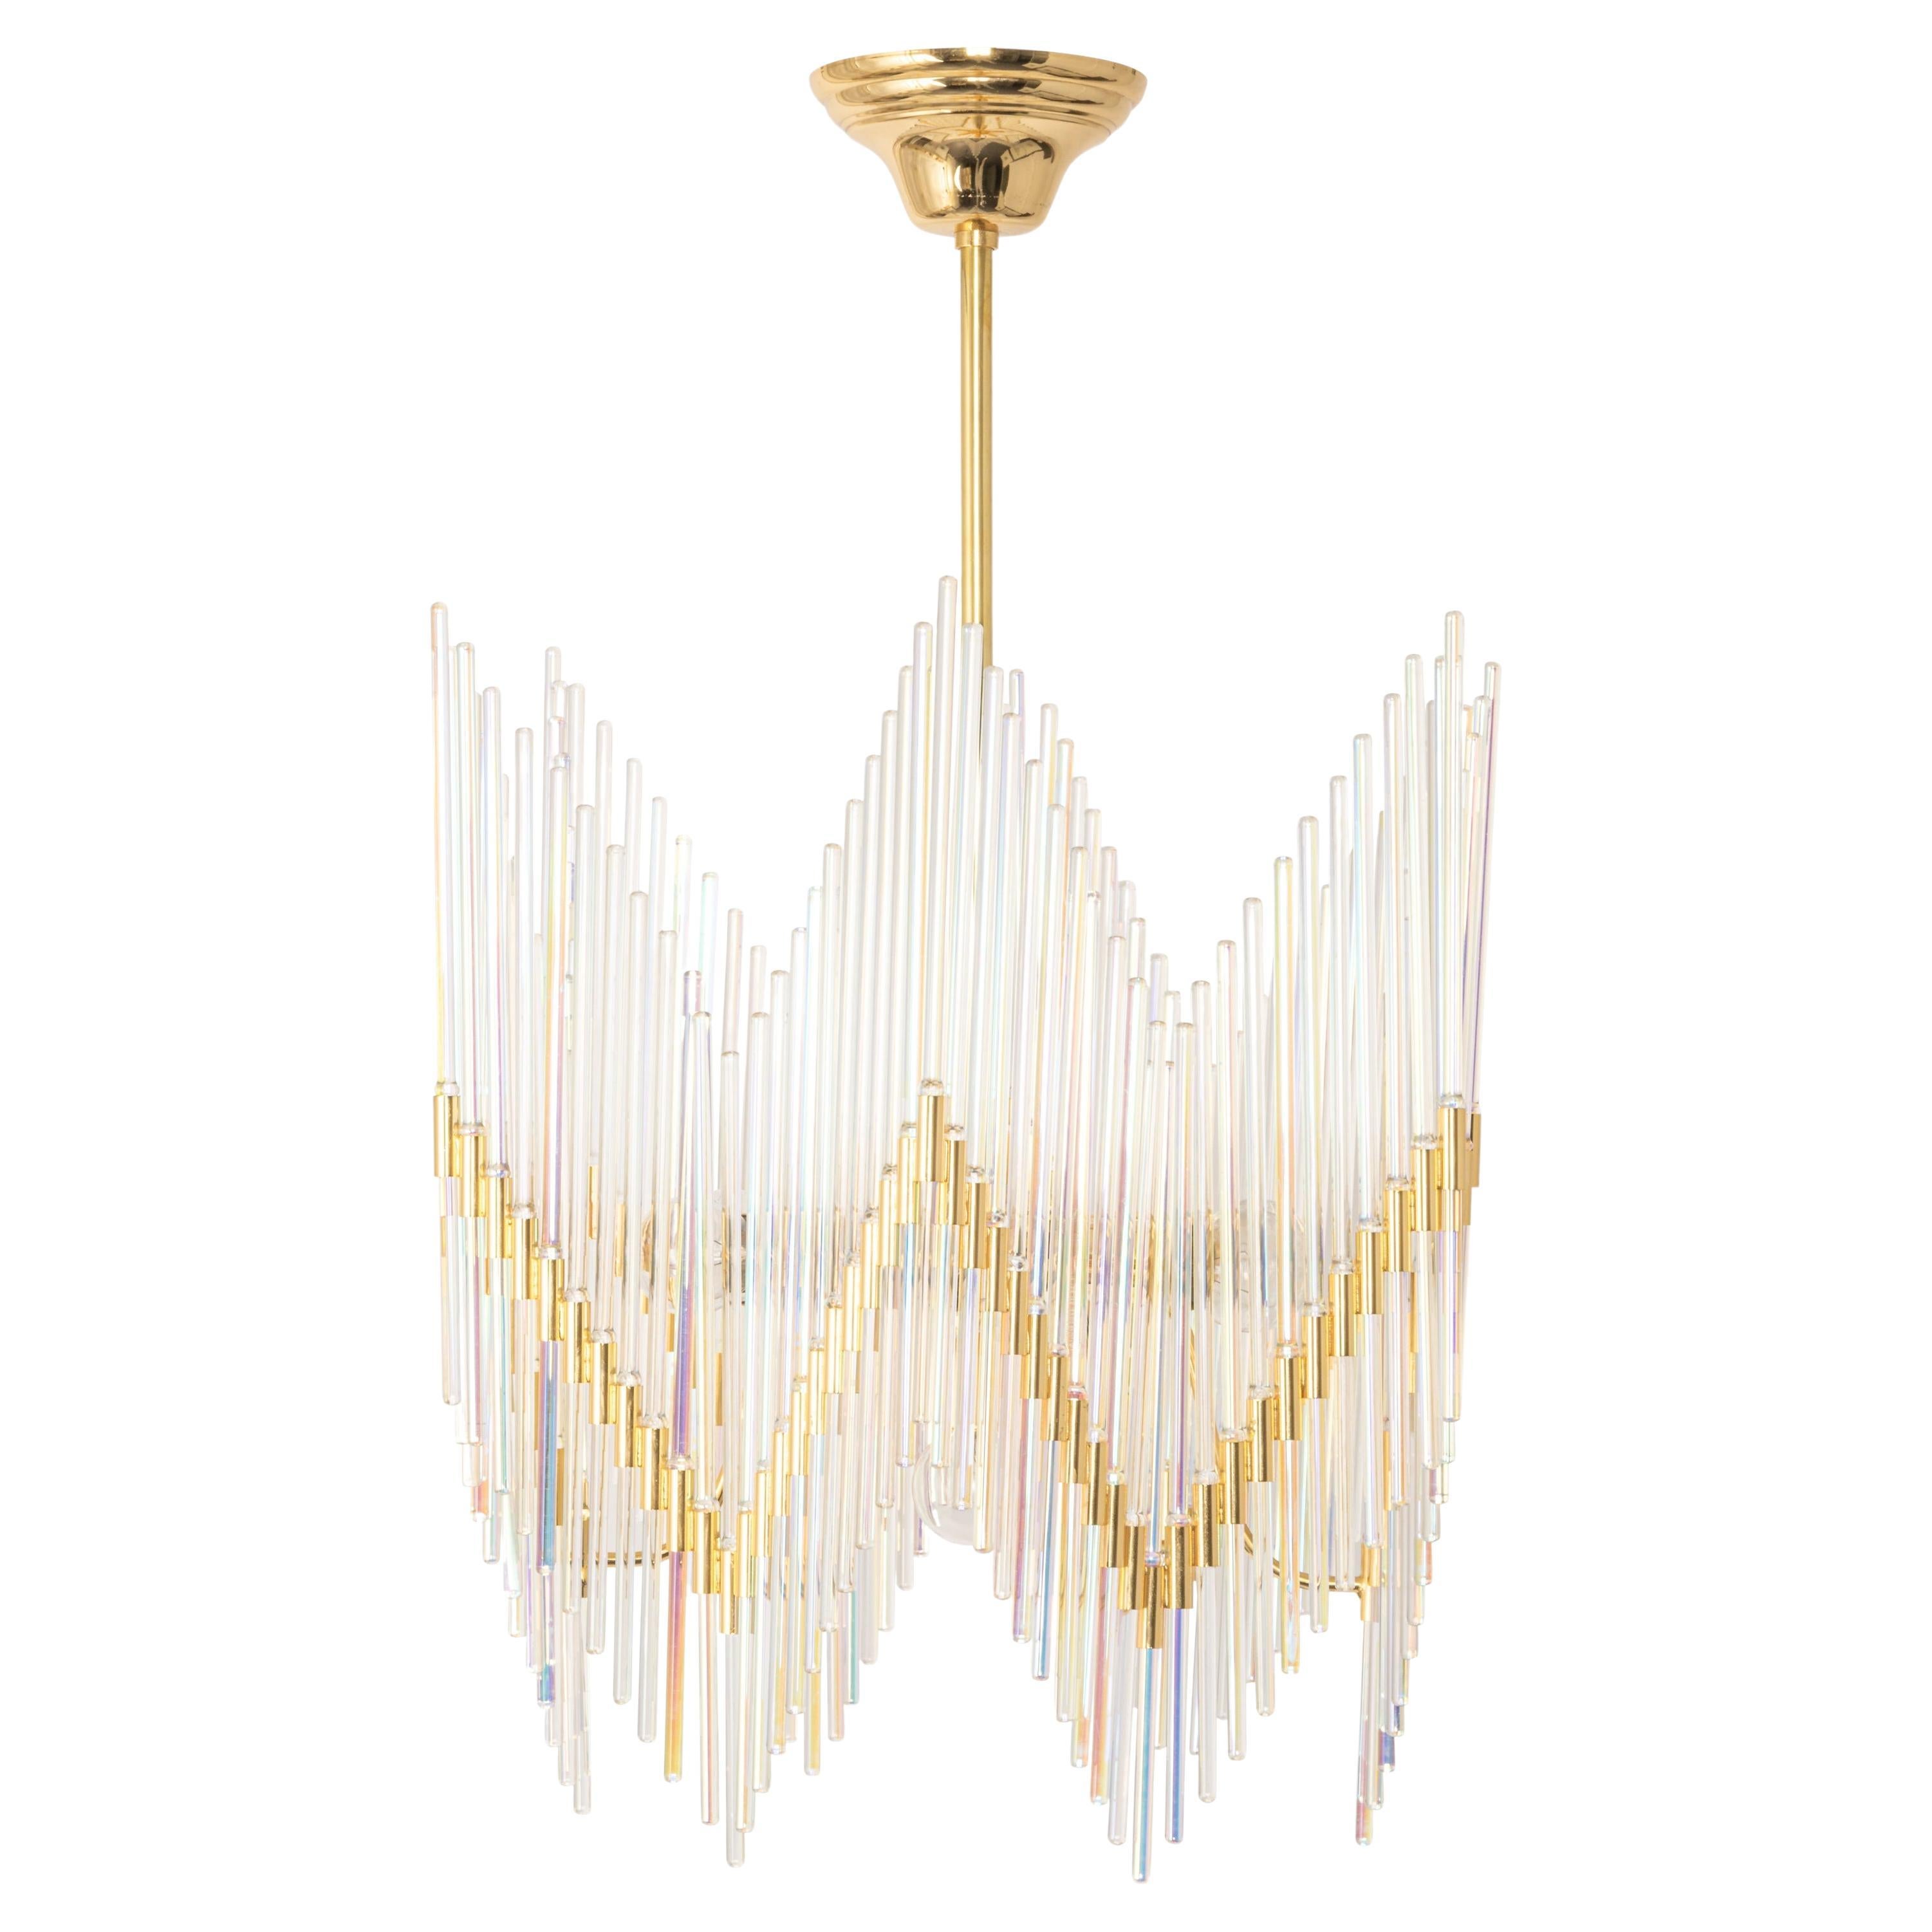 Stunning Gilt Brass and Crystal Glass Rods Chandelier by Palwa, Germany, 1970s For Sale